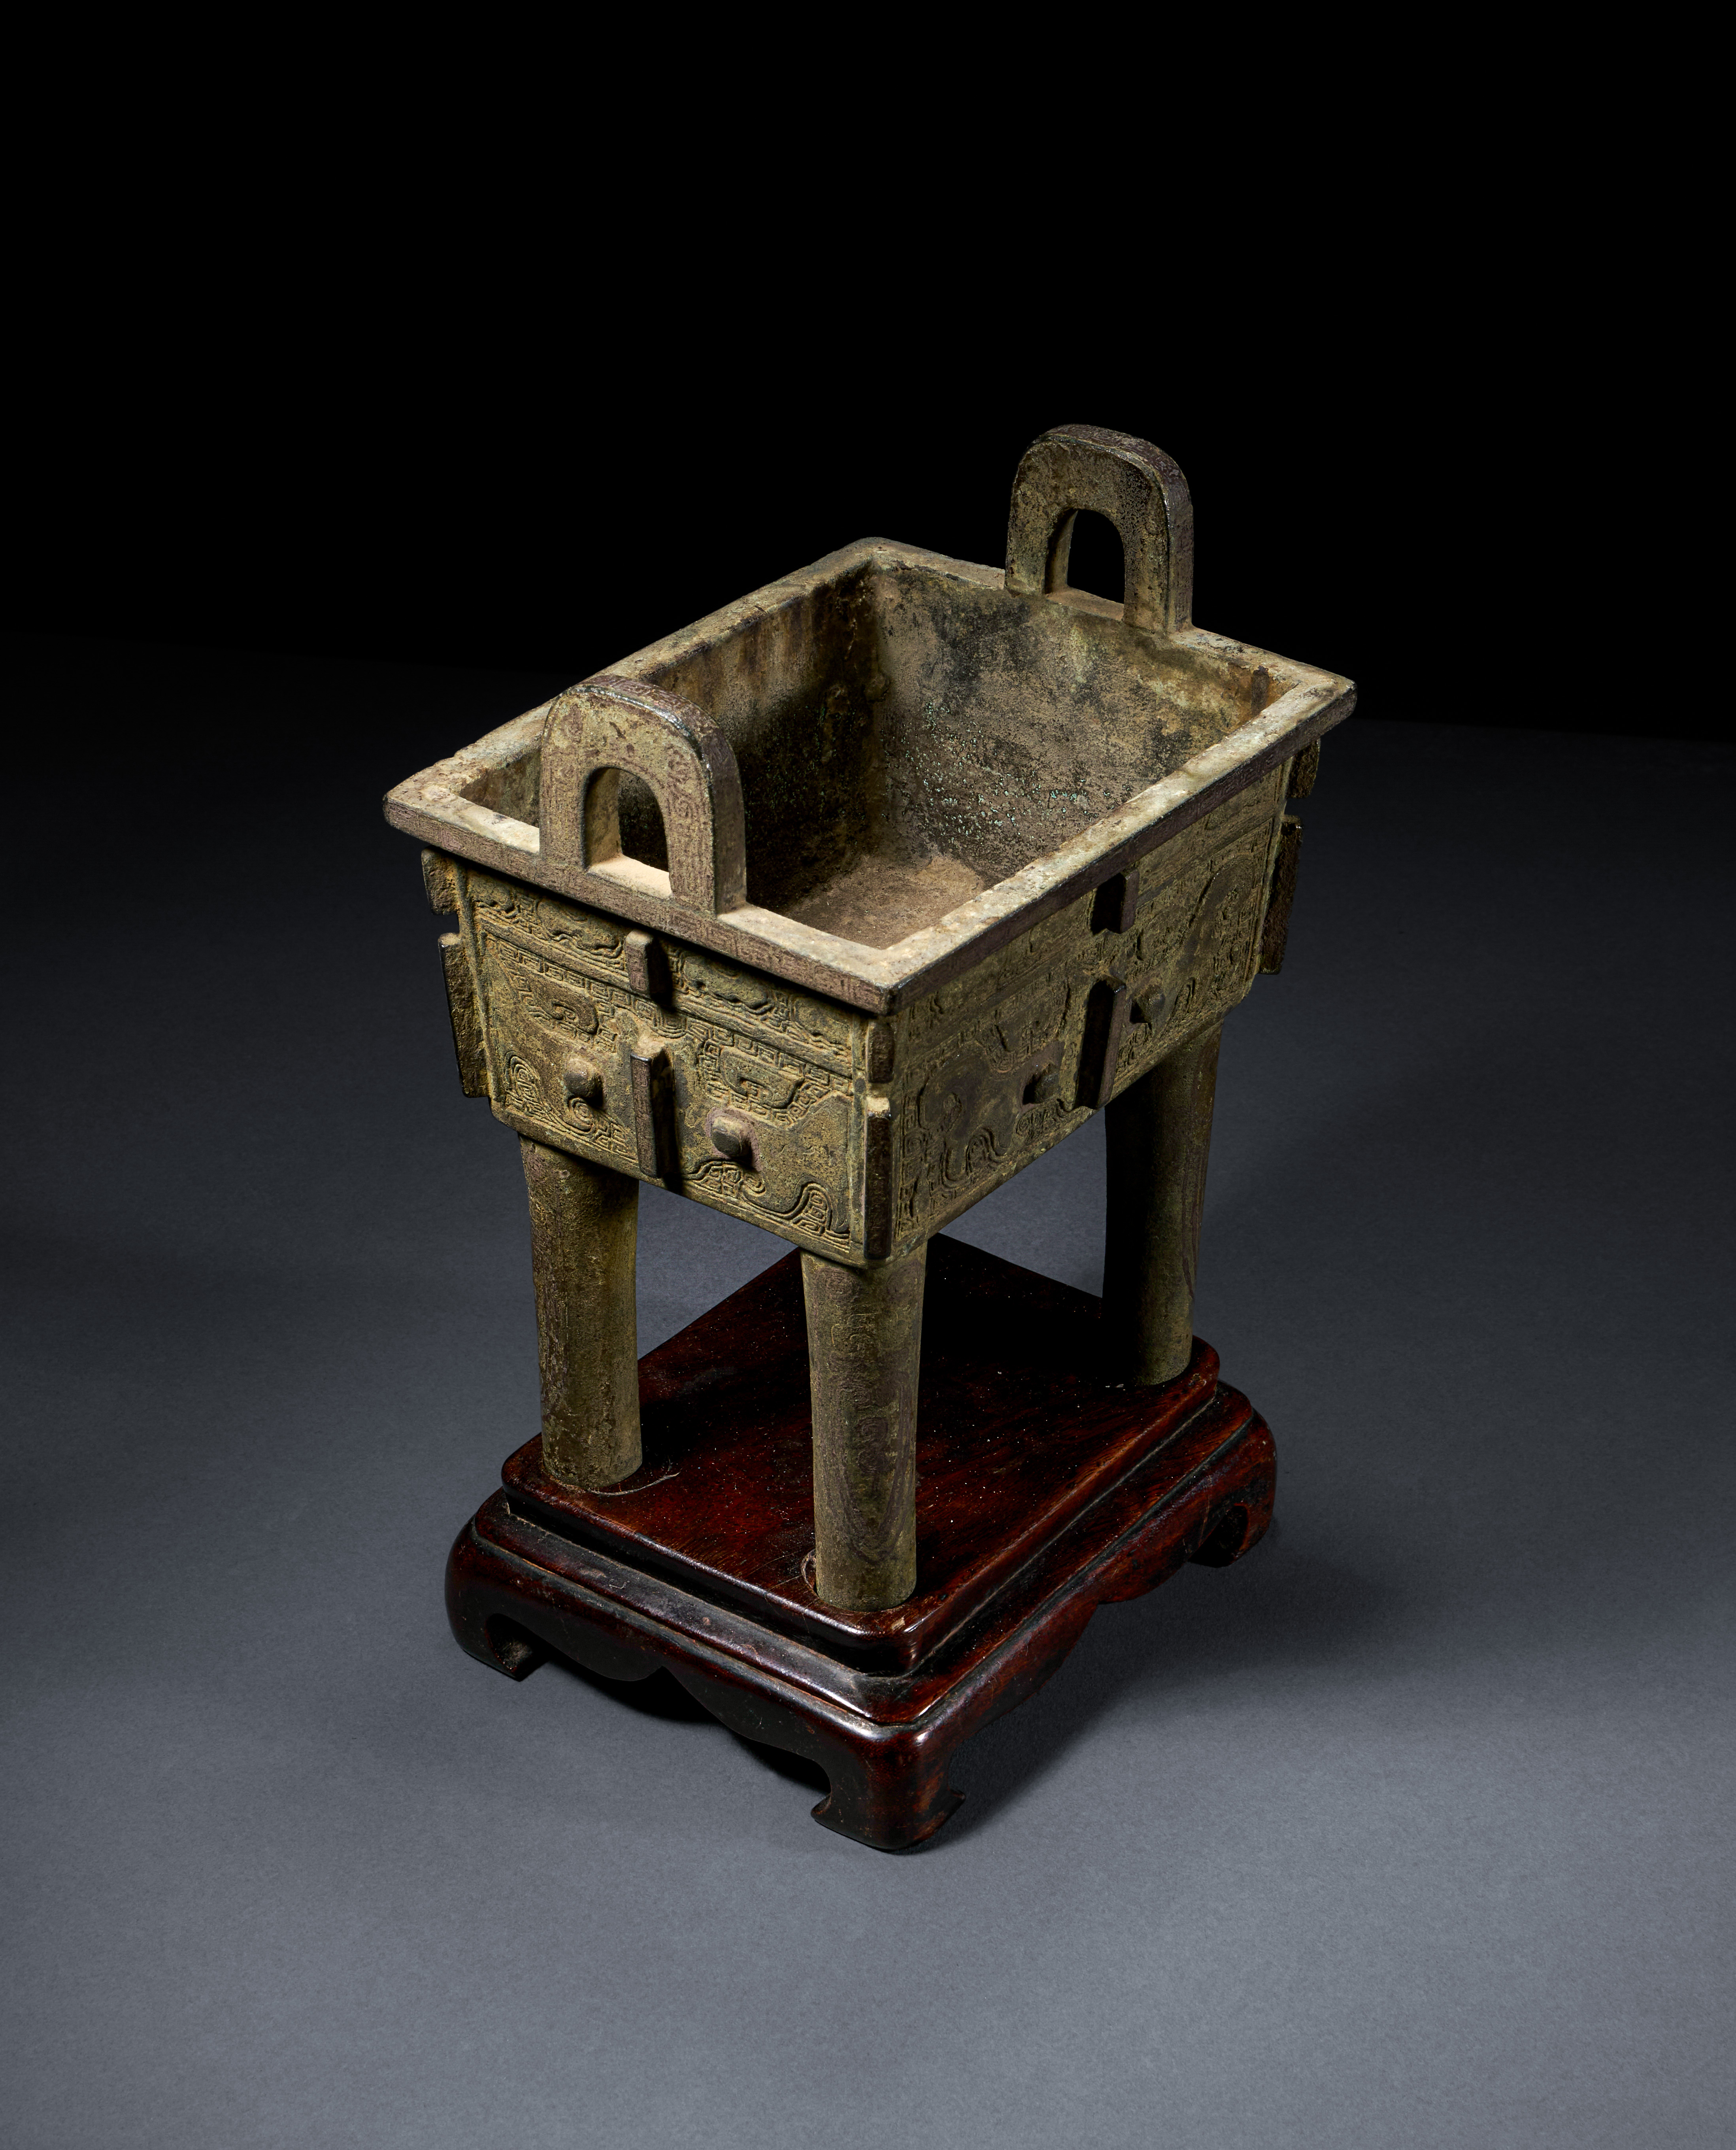 A BRONZE RITUAL RECTANGULAR FOOD VESSEL, FANGDING, LATE SHANG DYNASTY, ANYANG, 12TH-11TH CENTURY BC - Image 3 of 4